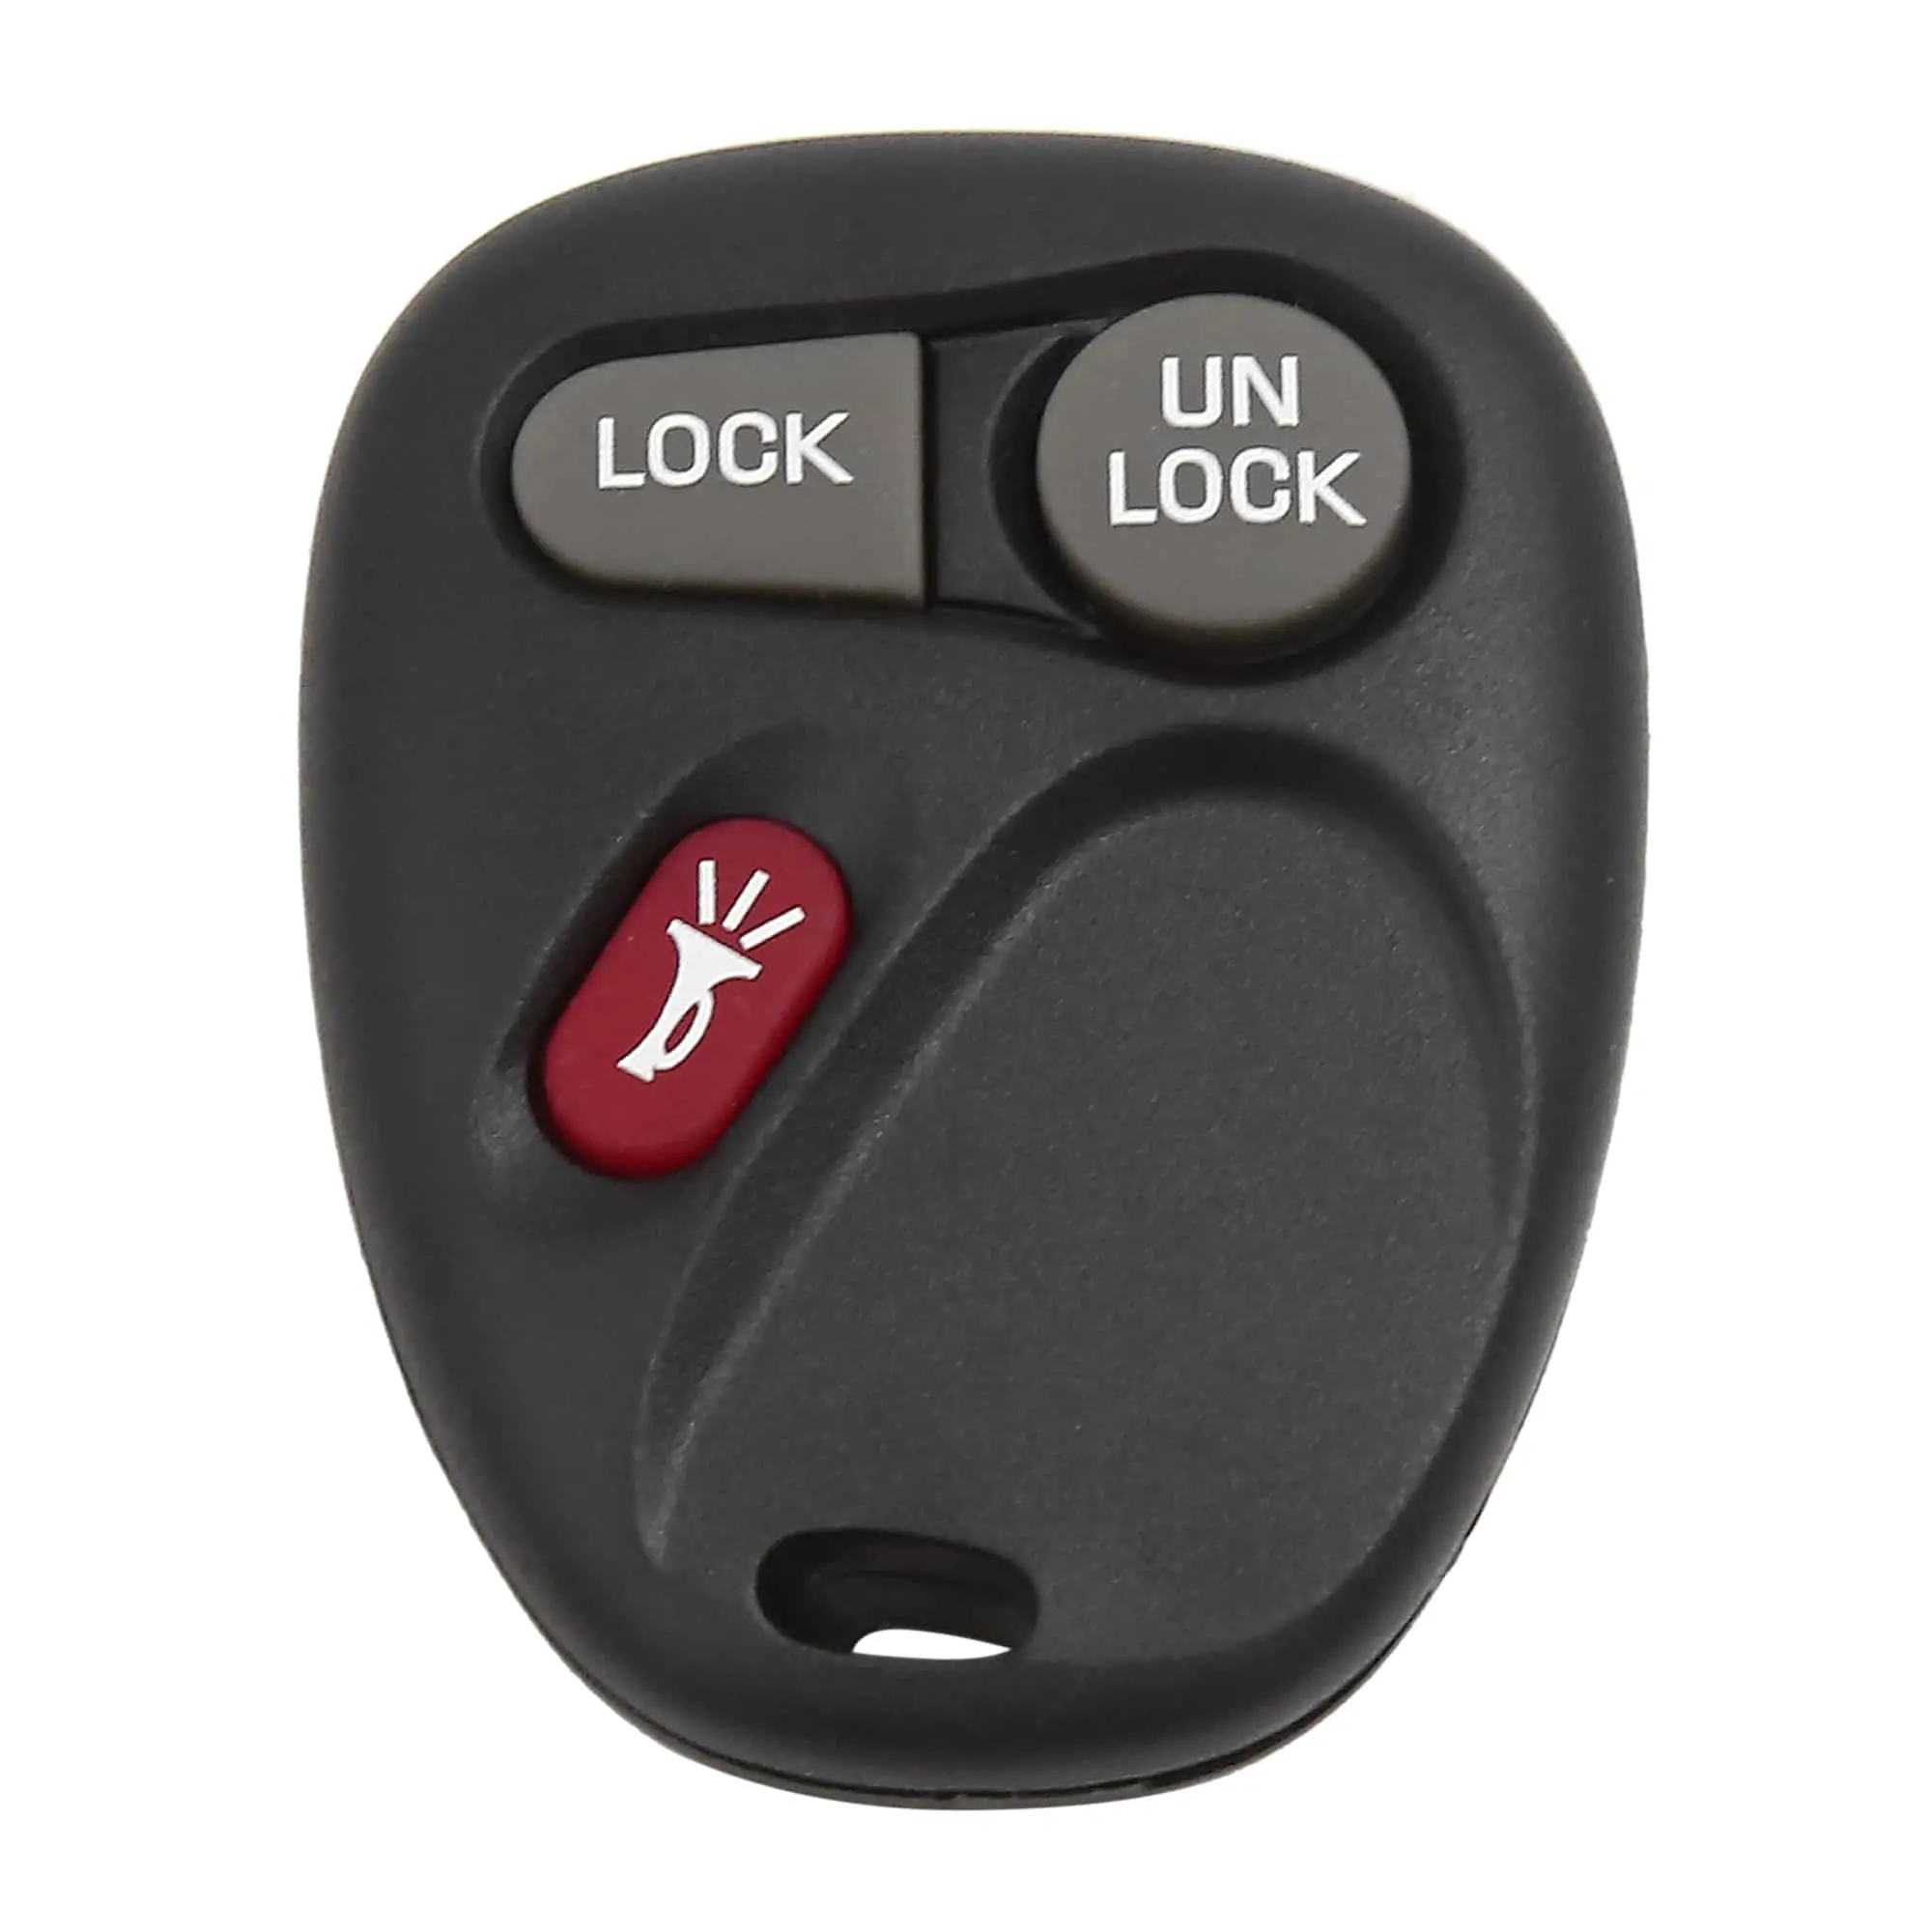 2Pcs New Replacement Light Keyless Entry Car Remote Key Fob for ...